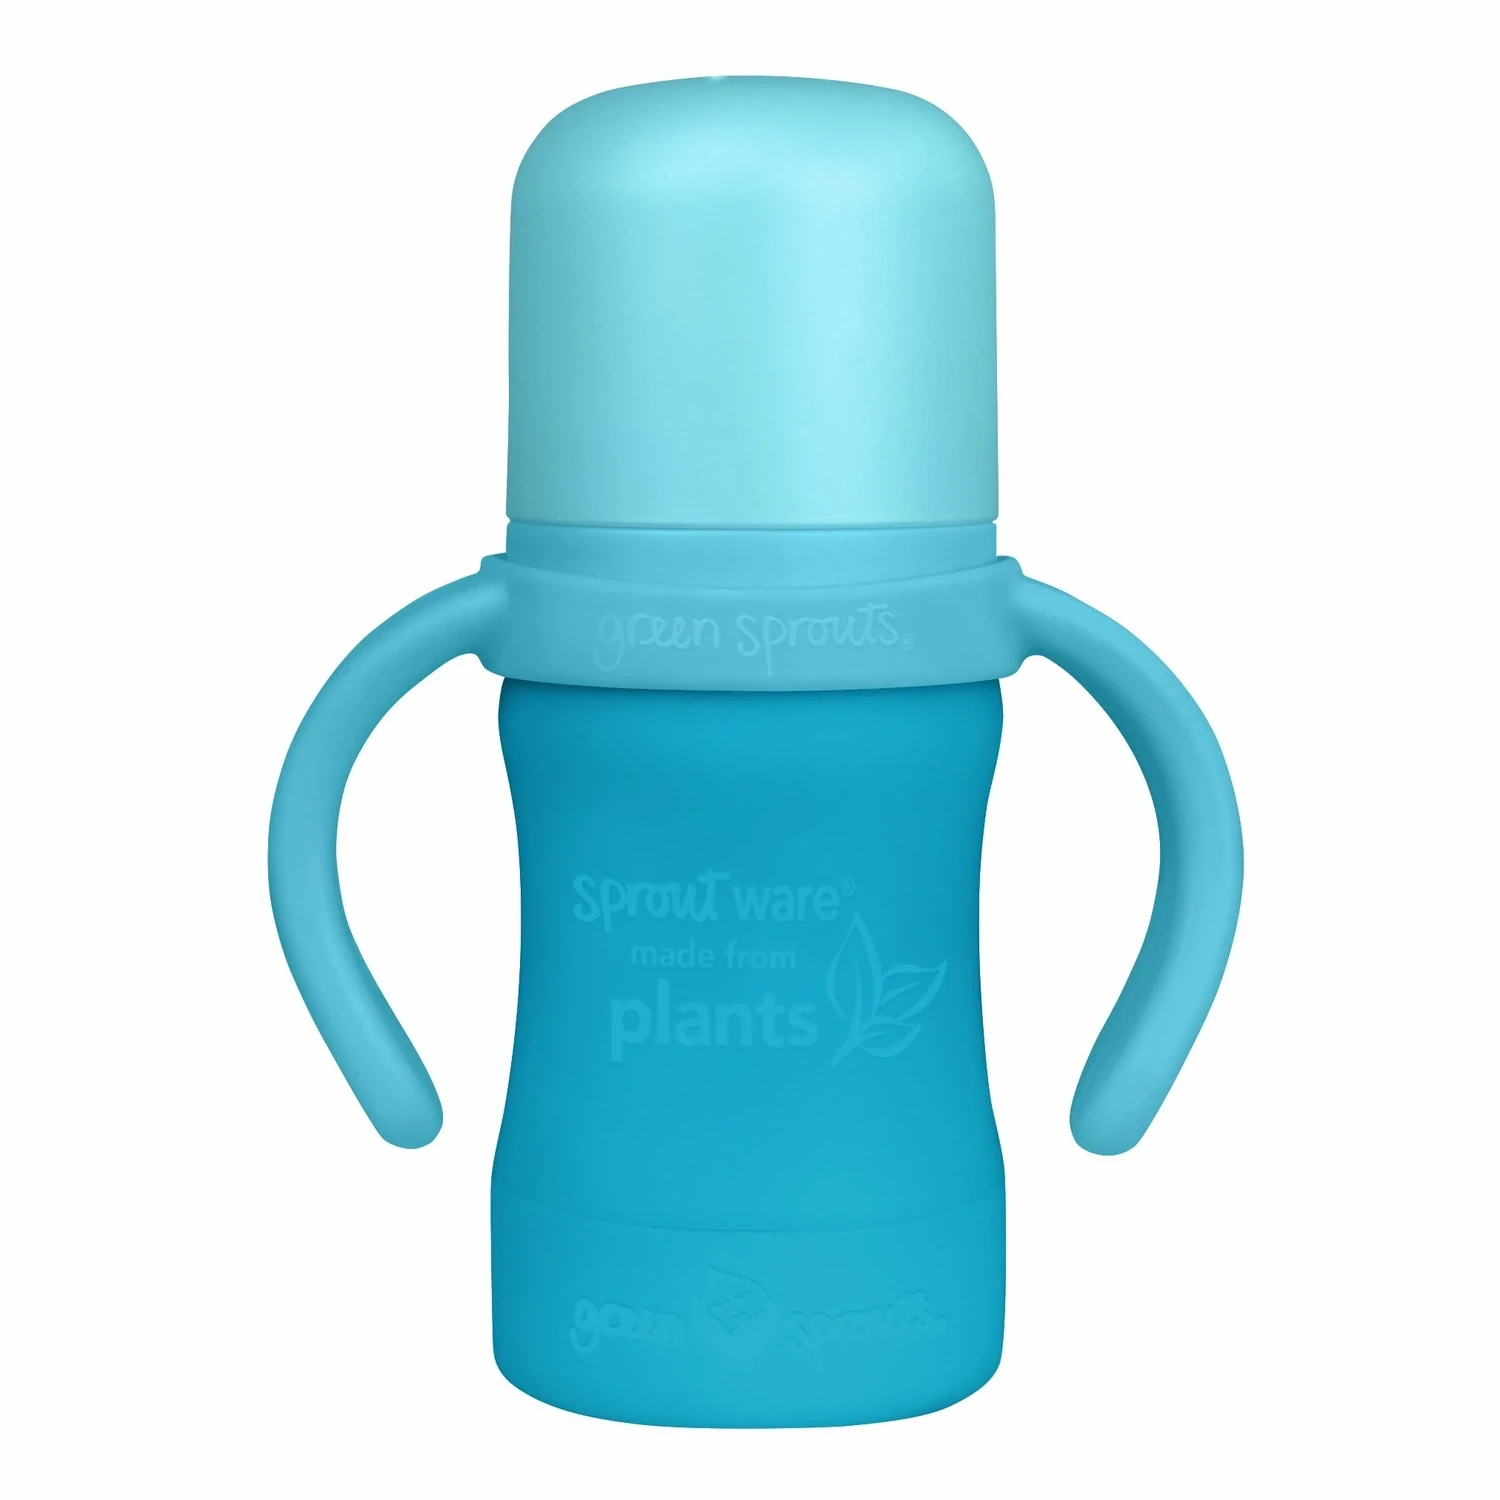 Sprout Ware Sippy Cup 177ml - Made From Plants, Colour: Green, Size: +6mth